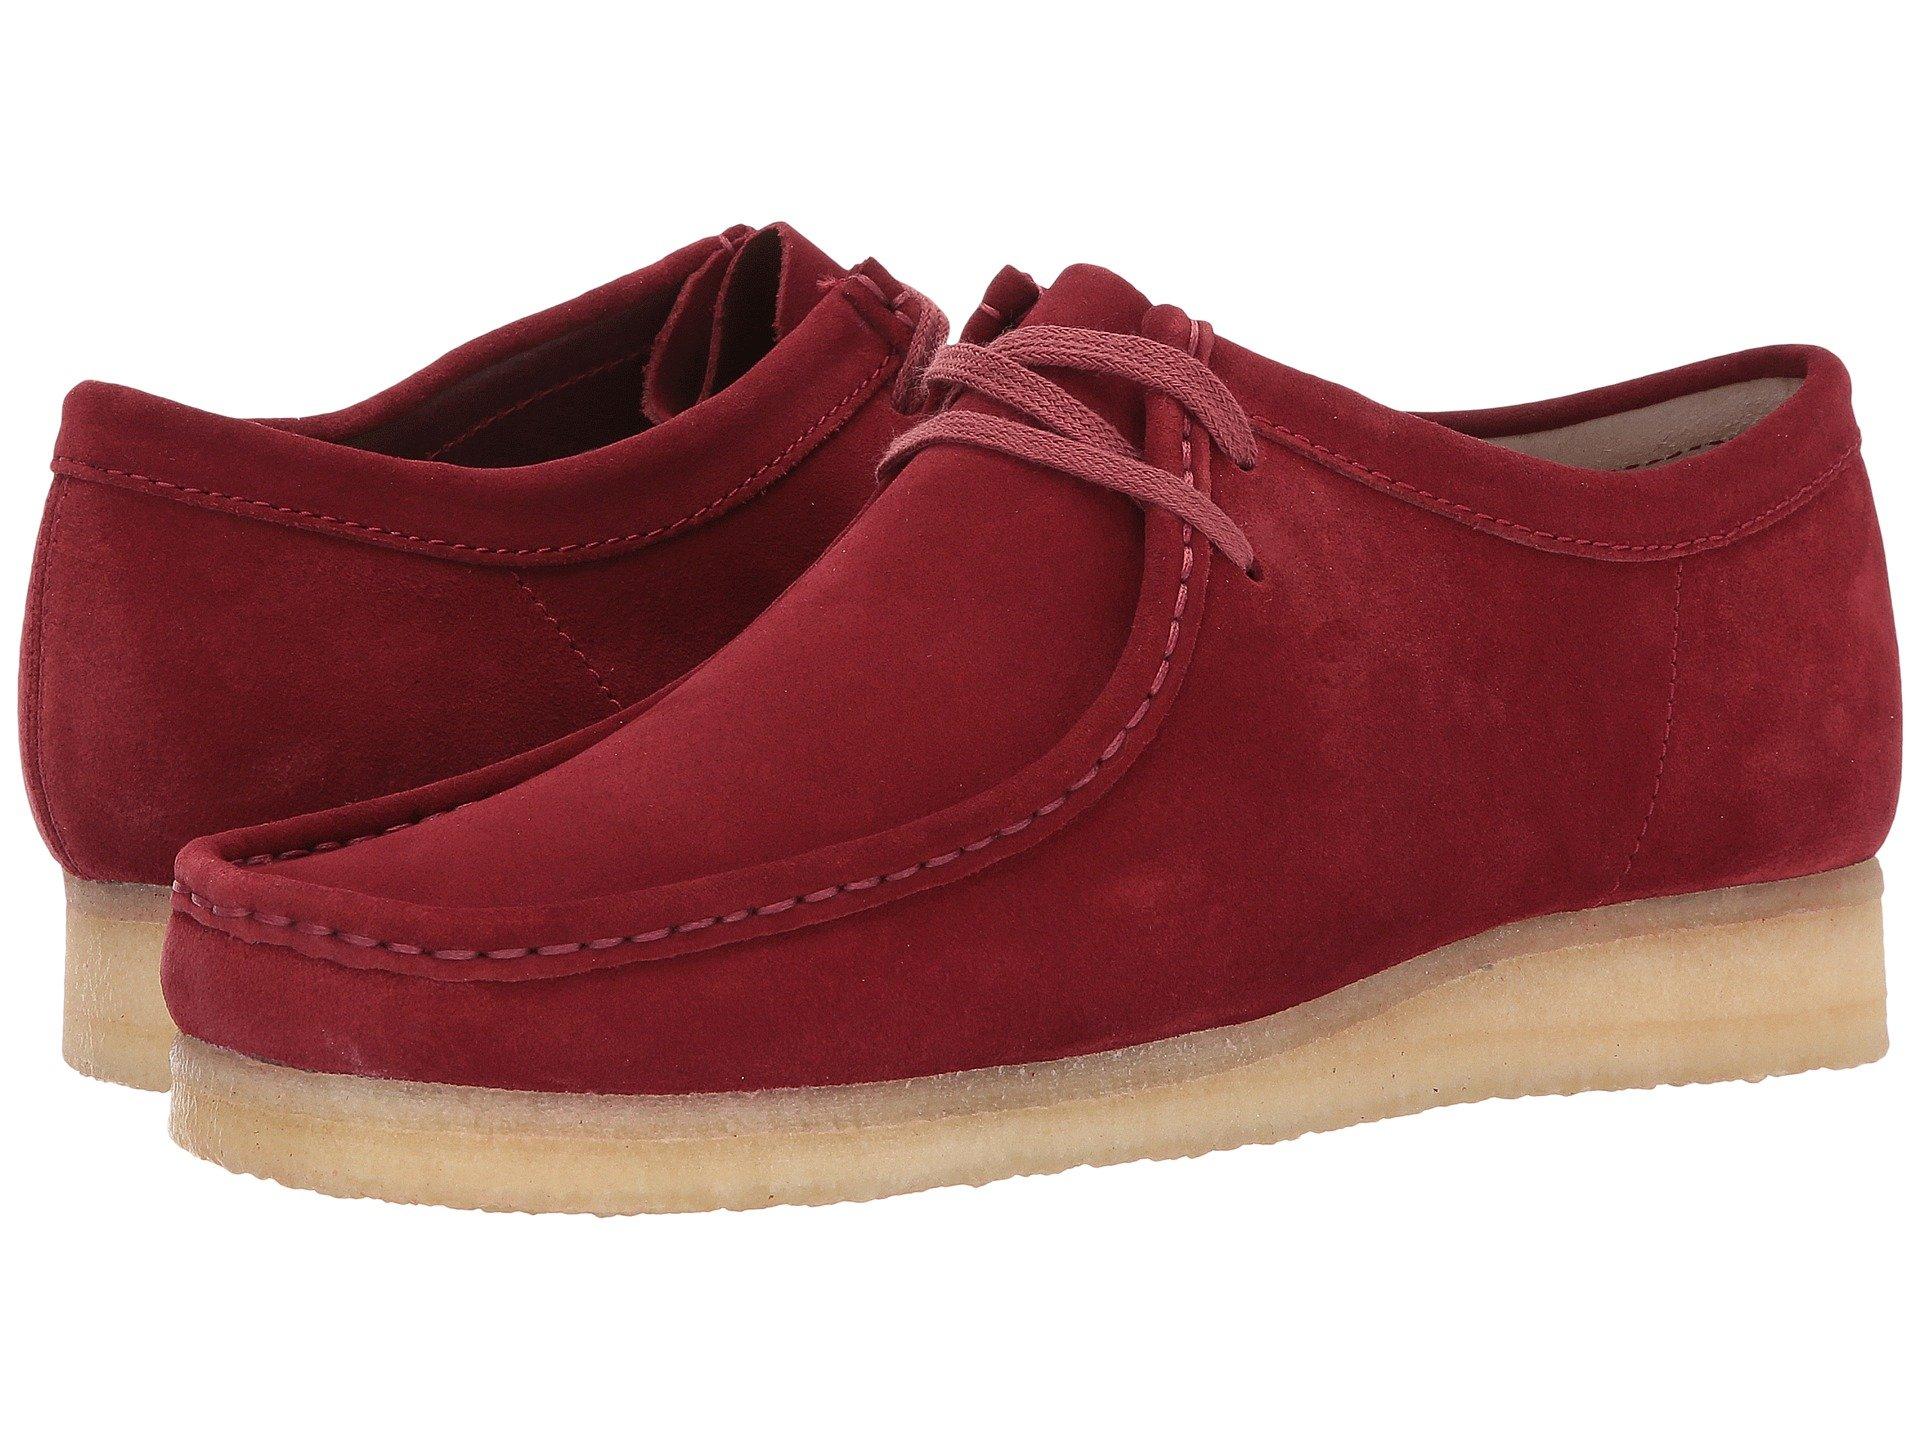 Clarks Wallabee In Red Suede | ModeSens